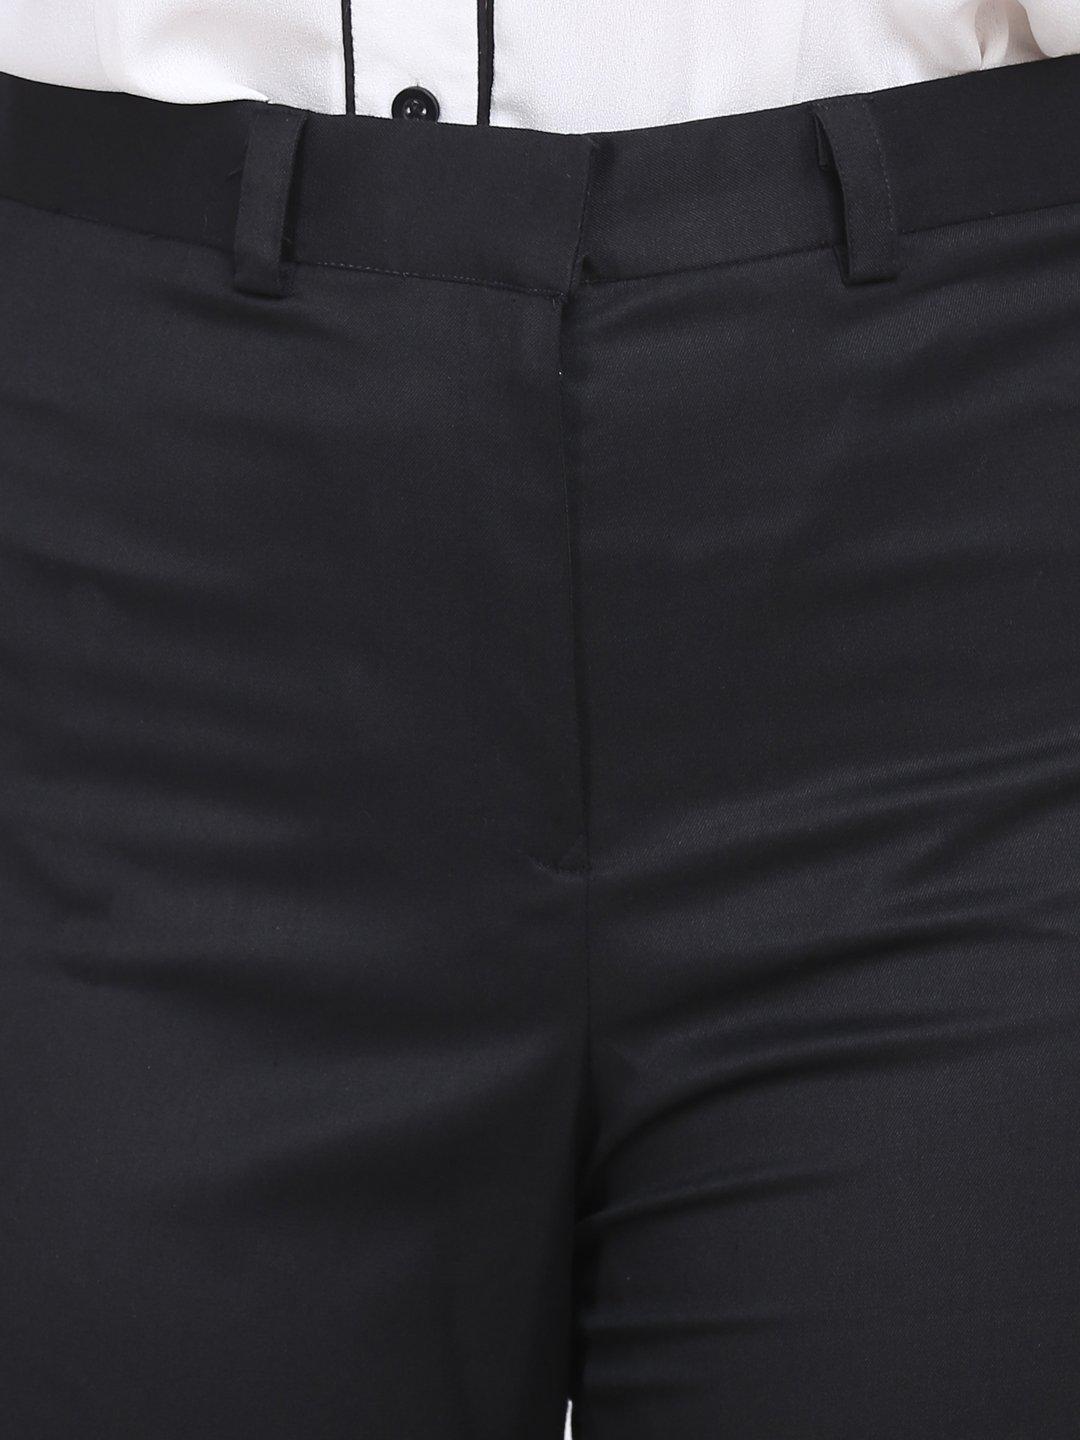 Black Poly Cotton Formal Trousers